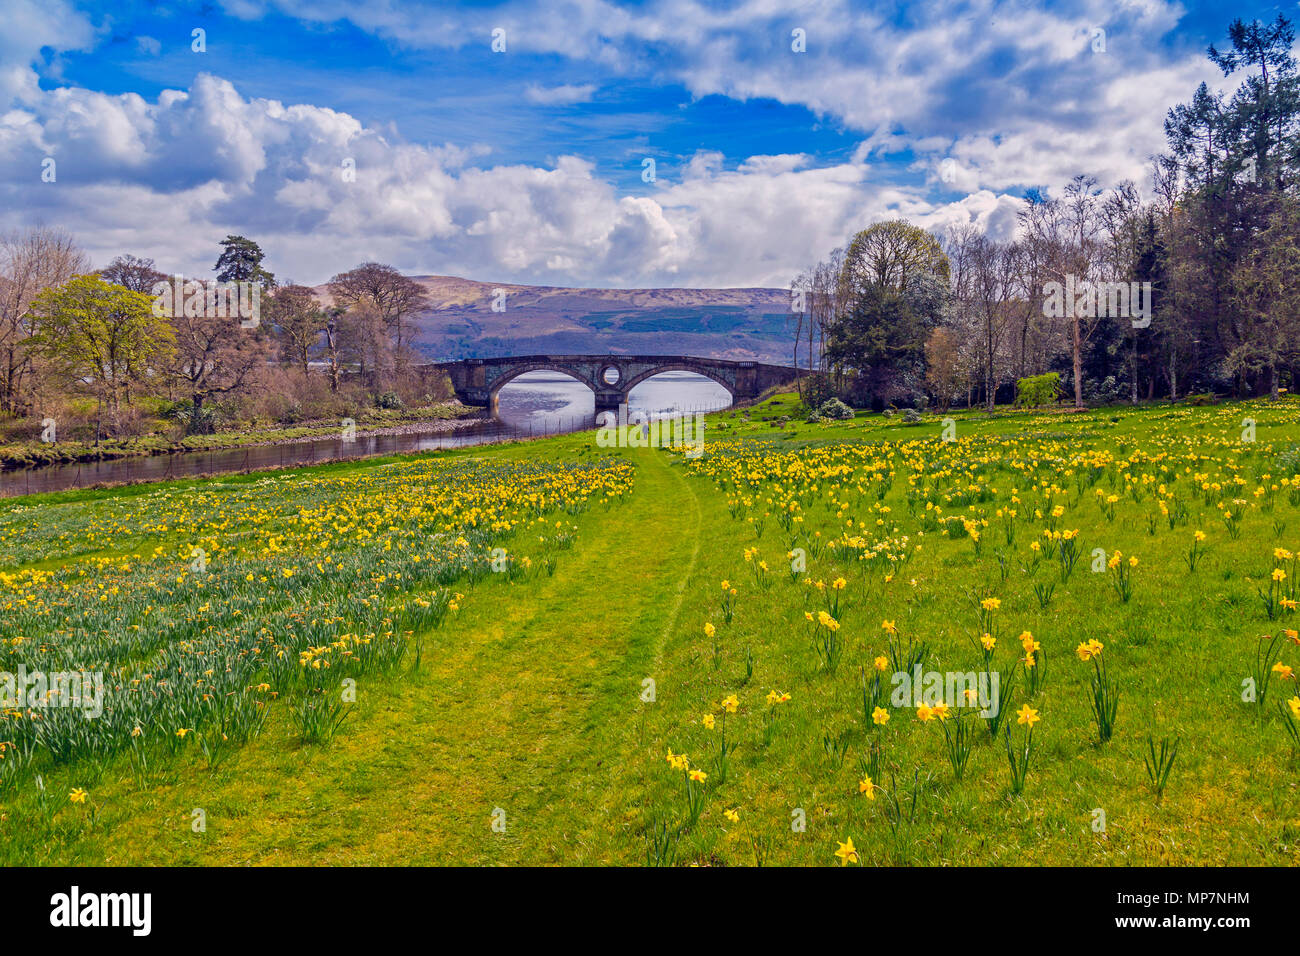 Spring daffodils, Loch Fyne, the River Aray and Inveraray bridge from the grounds of Inveraray Castle, Argyll & Bute, Scotland, UK Stock Photo